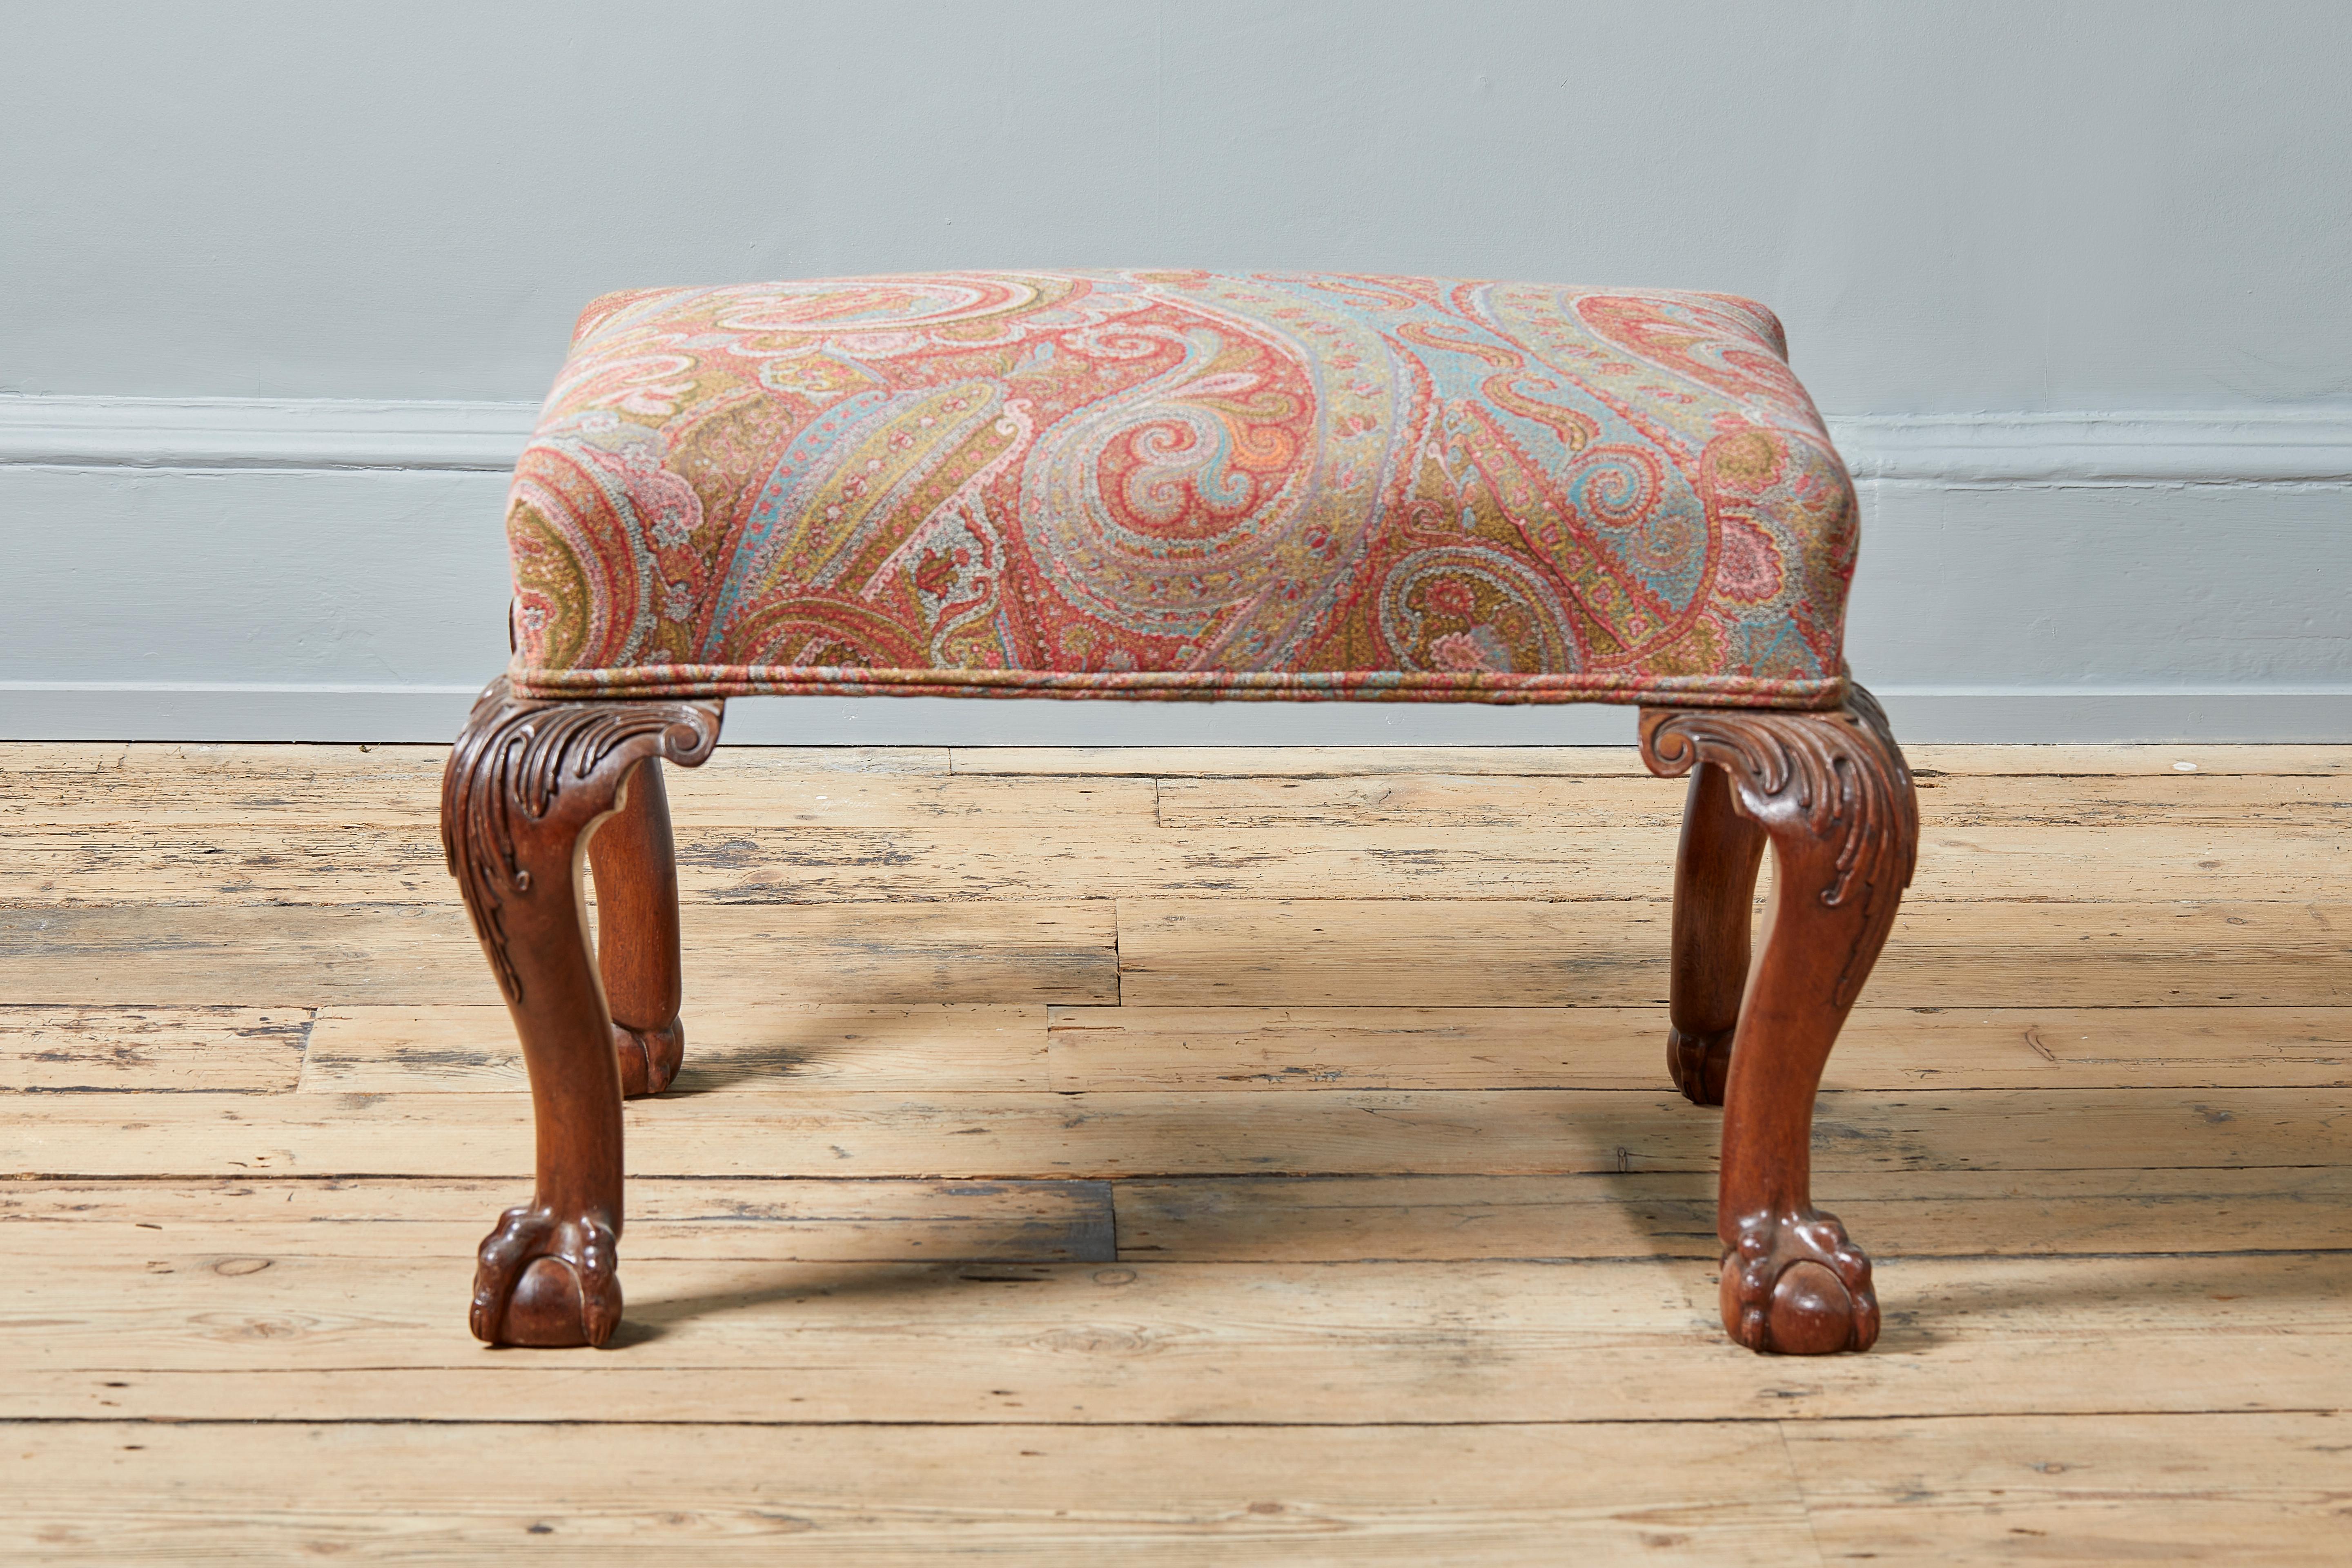 The Etro paisley upholstered seat on leaf capped, cabriole legs with claw and ball feet.